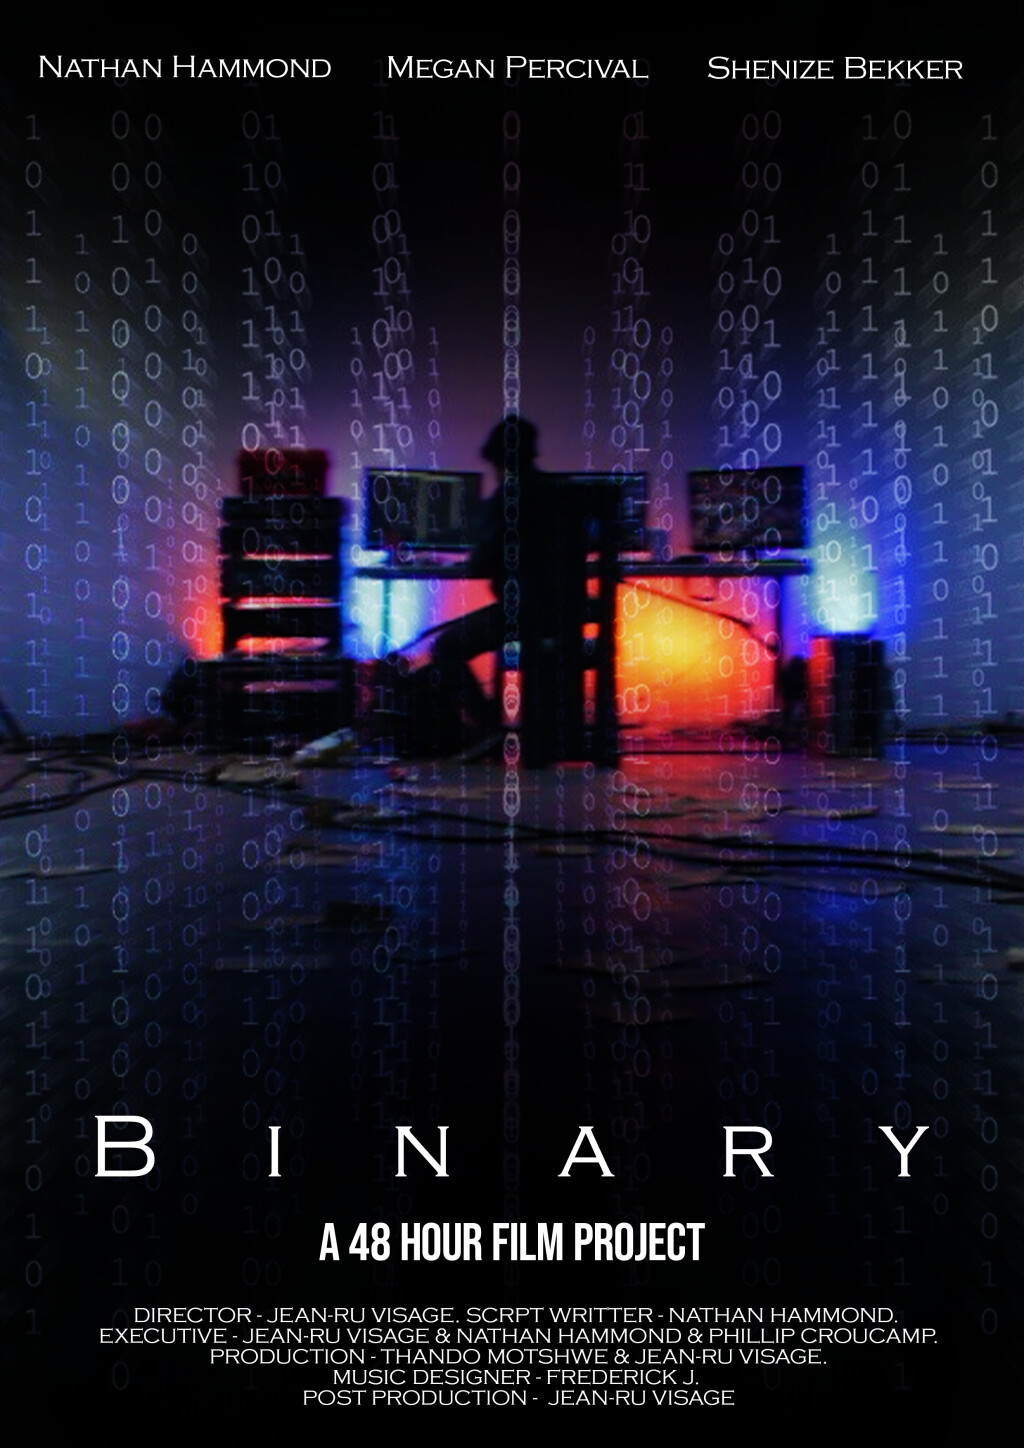 Filmposter for BINNARY